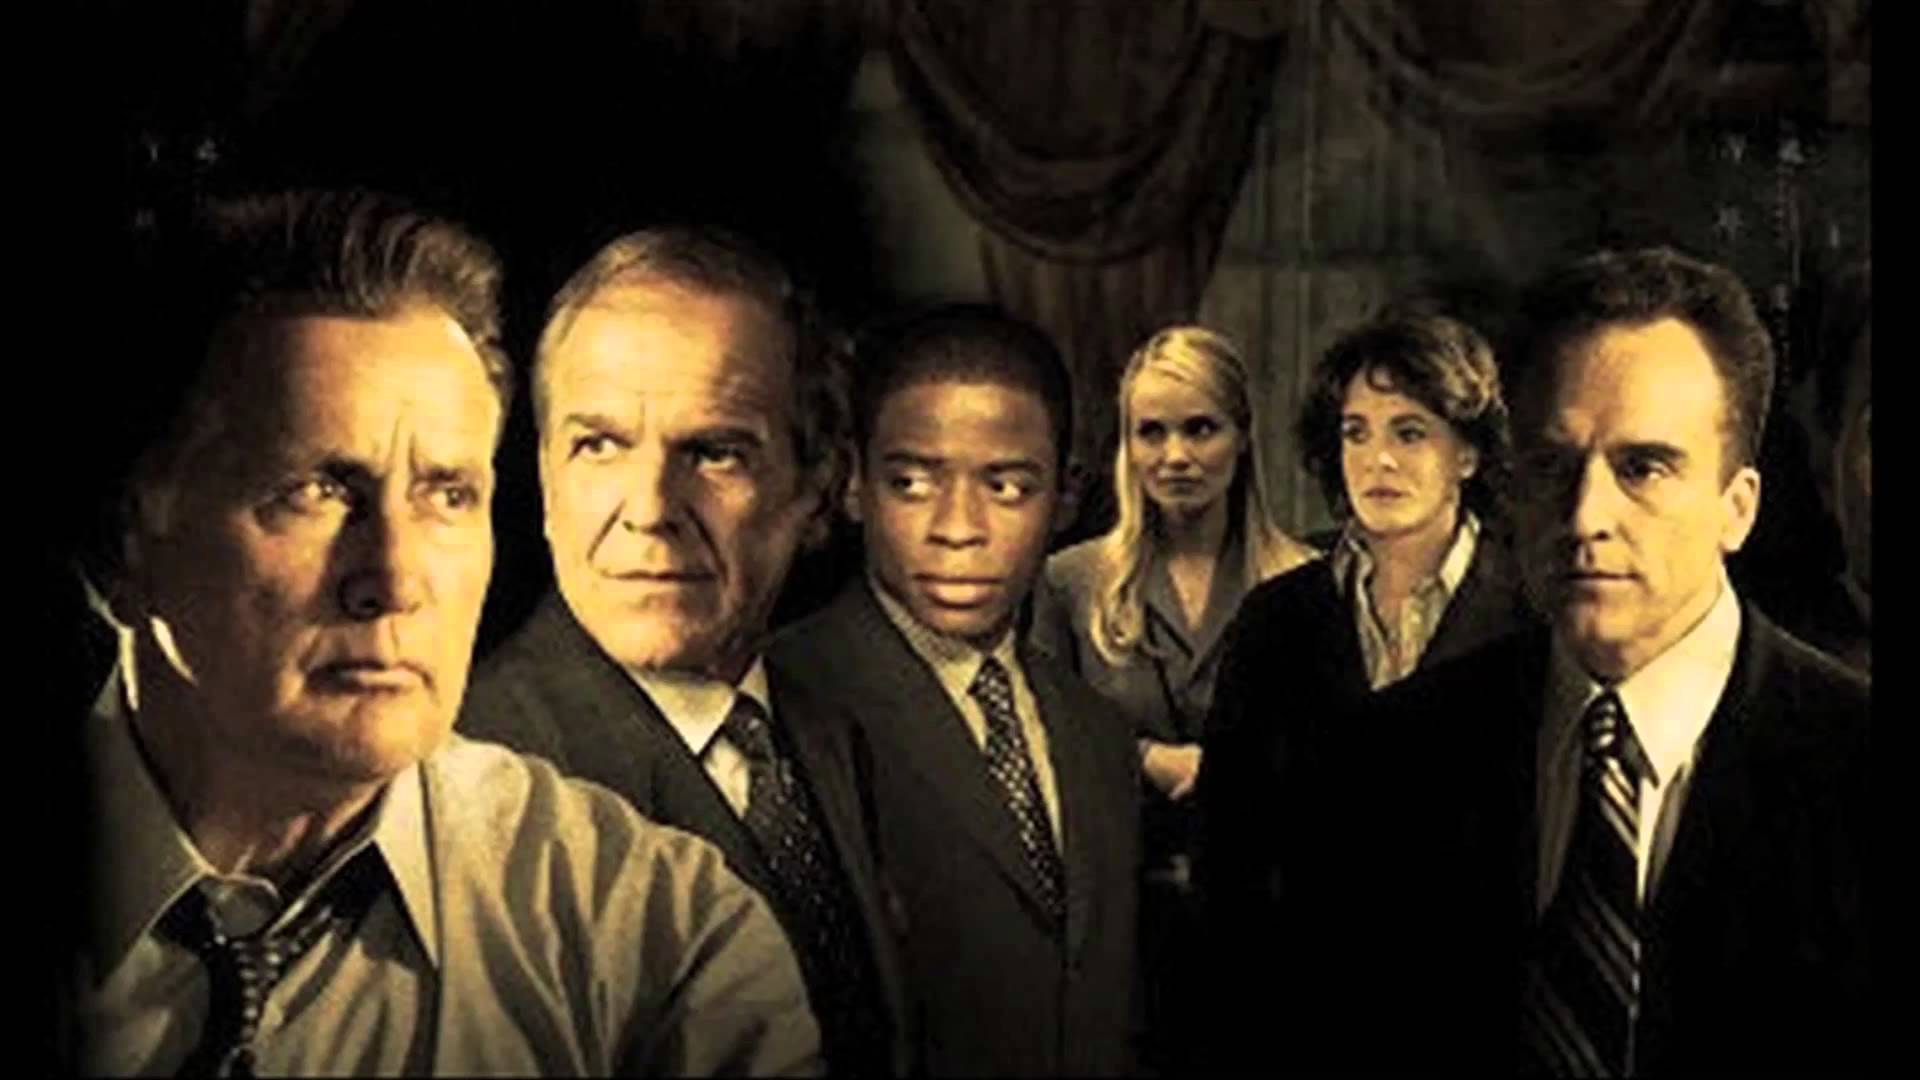 The West Wing wallpaper, TV Show, HQ The West Wing pictureK Wallpaper 2019